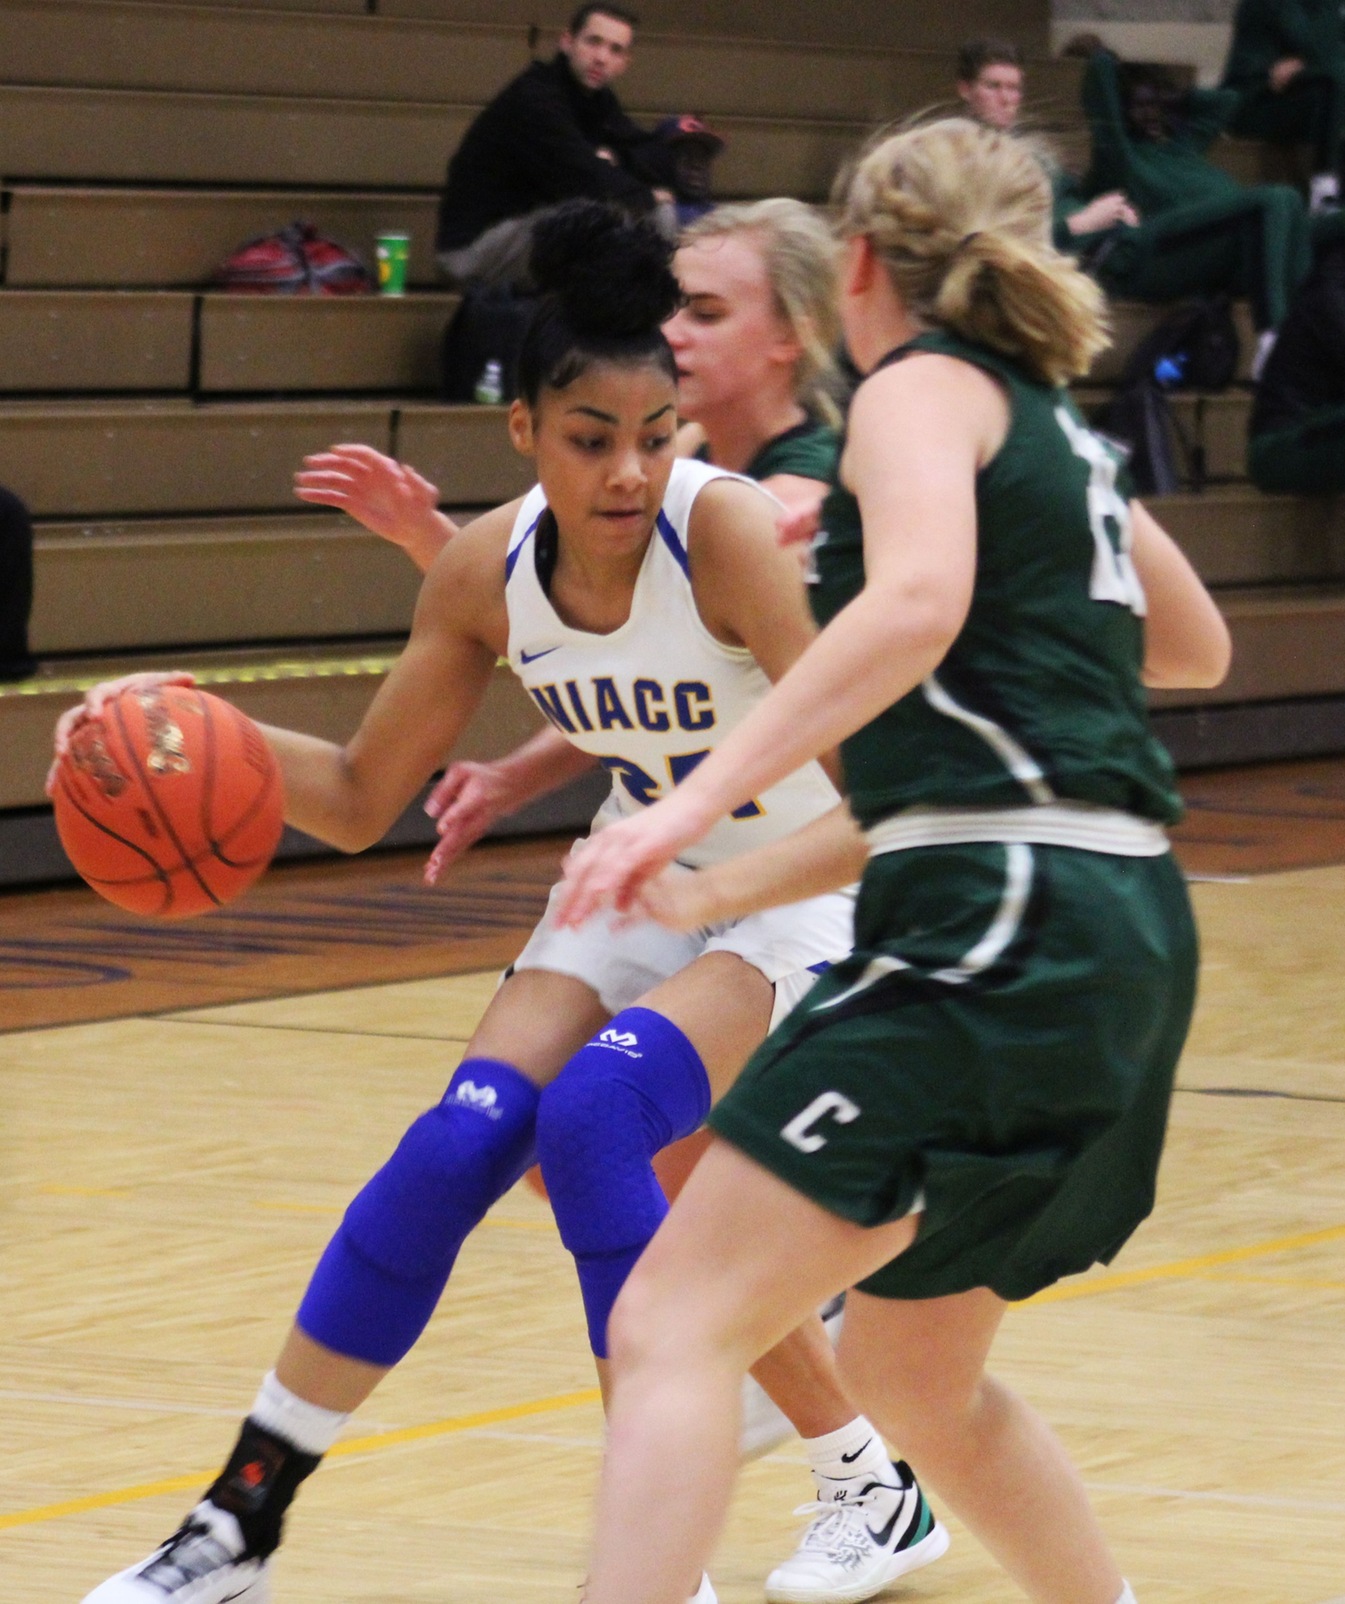 Sierra Morrow drives to the basket in Sunday's win over Central CC.